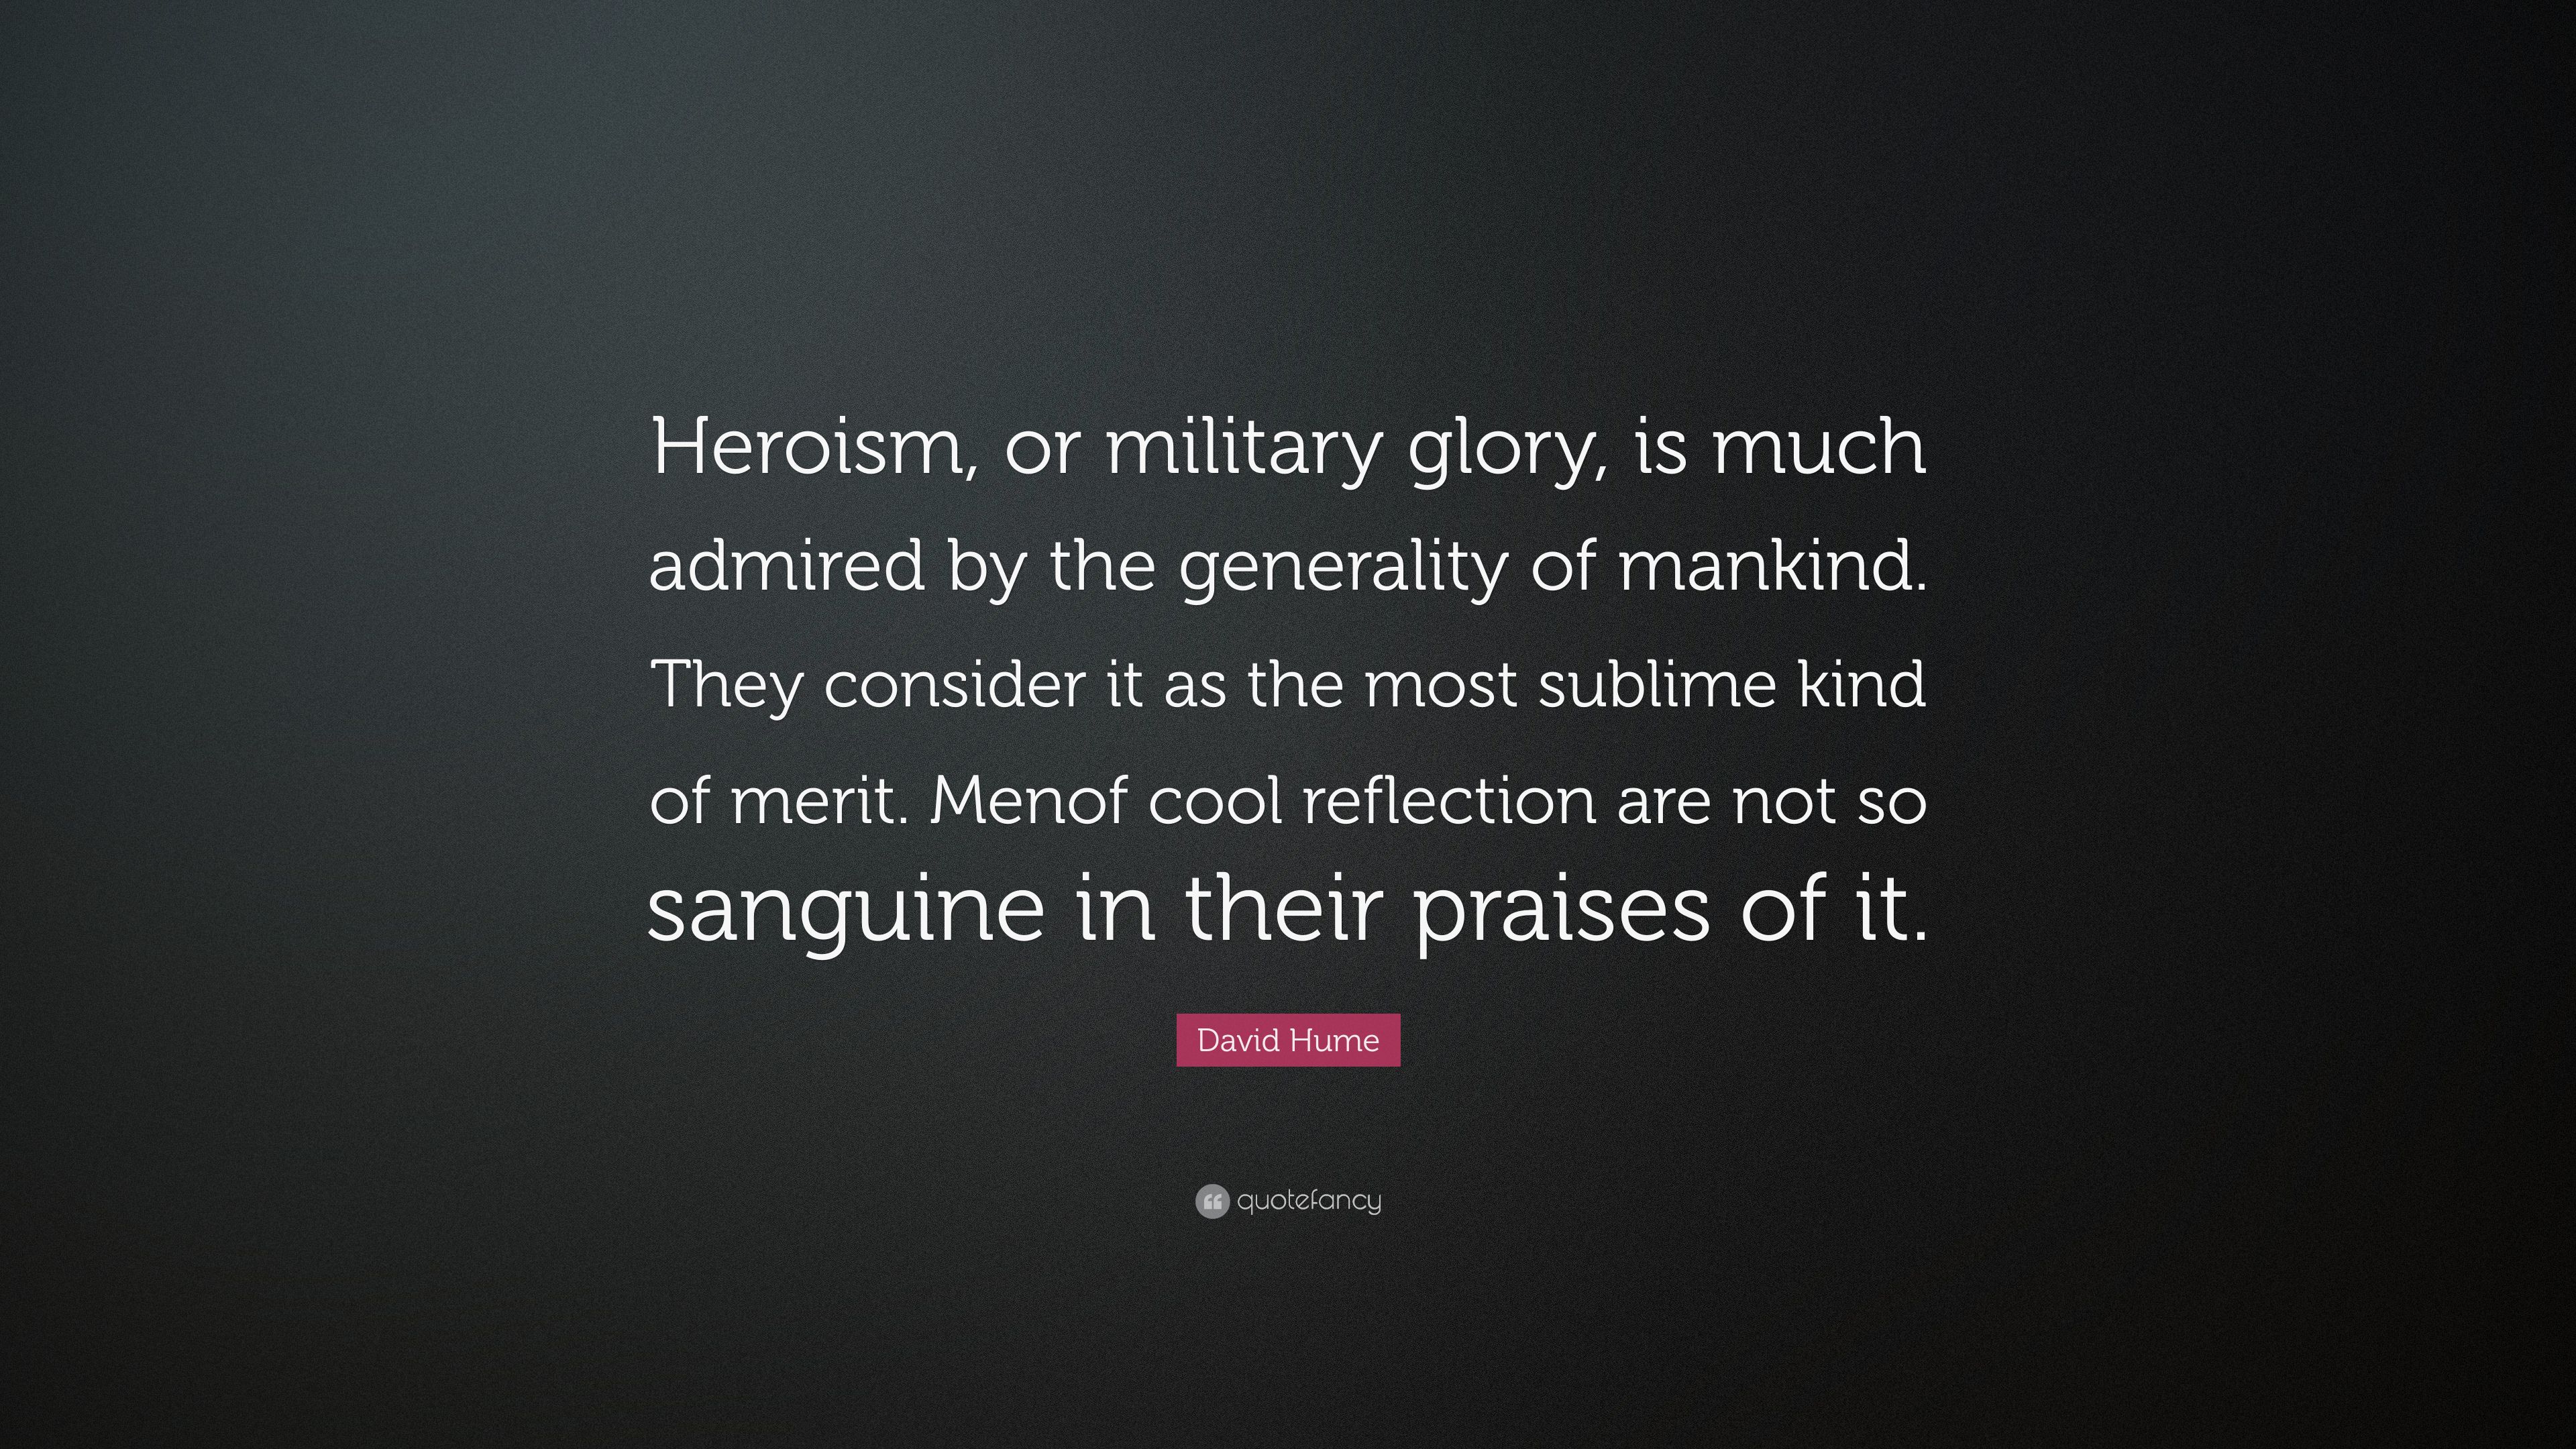 David Hume Quote: “Heroism, or military glory, is much admired by the generality of mankind. They consider it as the most sublime kind of m.” (7 wallpaper)